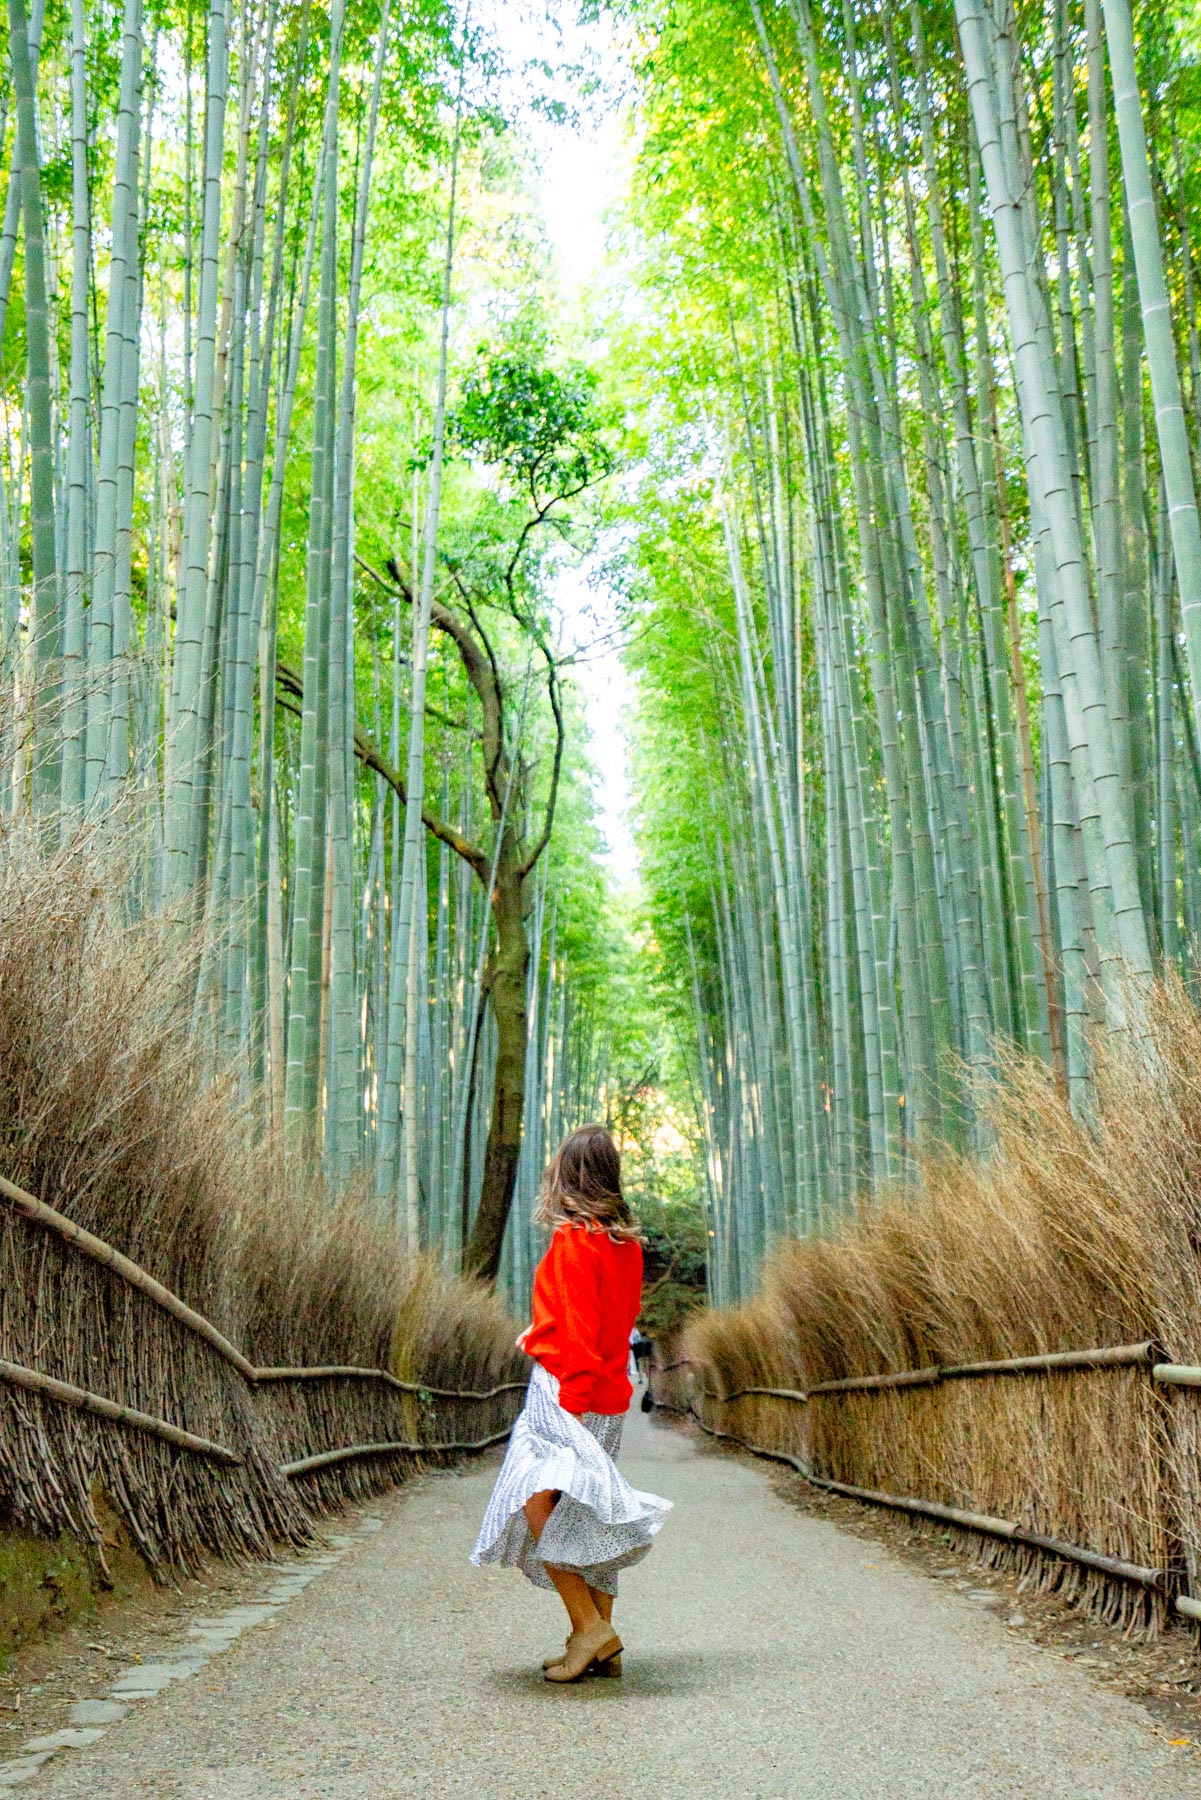 Arashiyama Bamboo Forest Kyoto
Visiting Kyoto for the first time